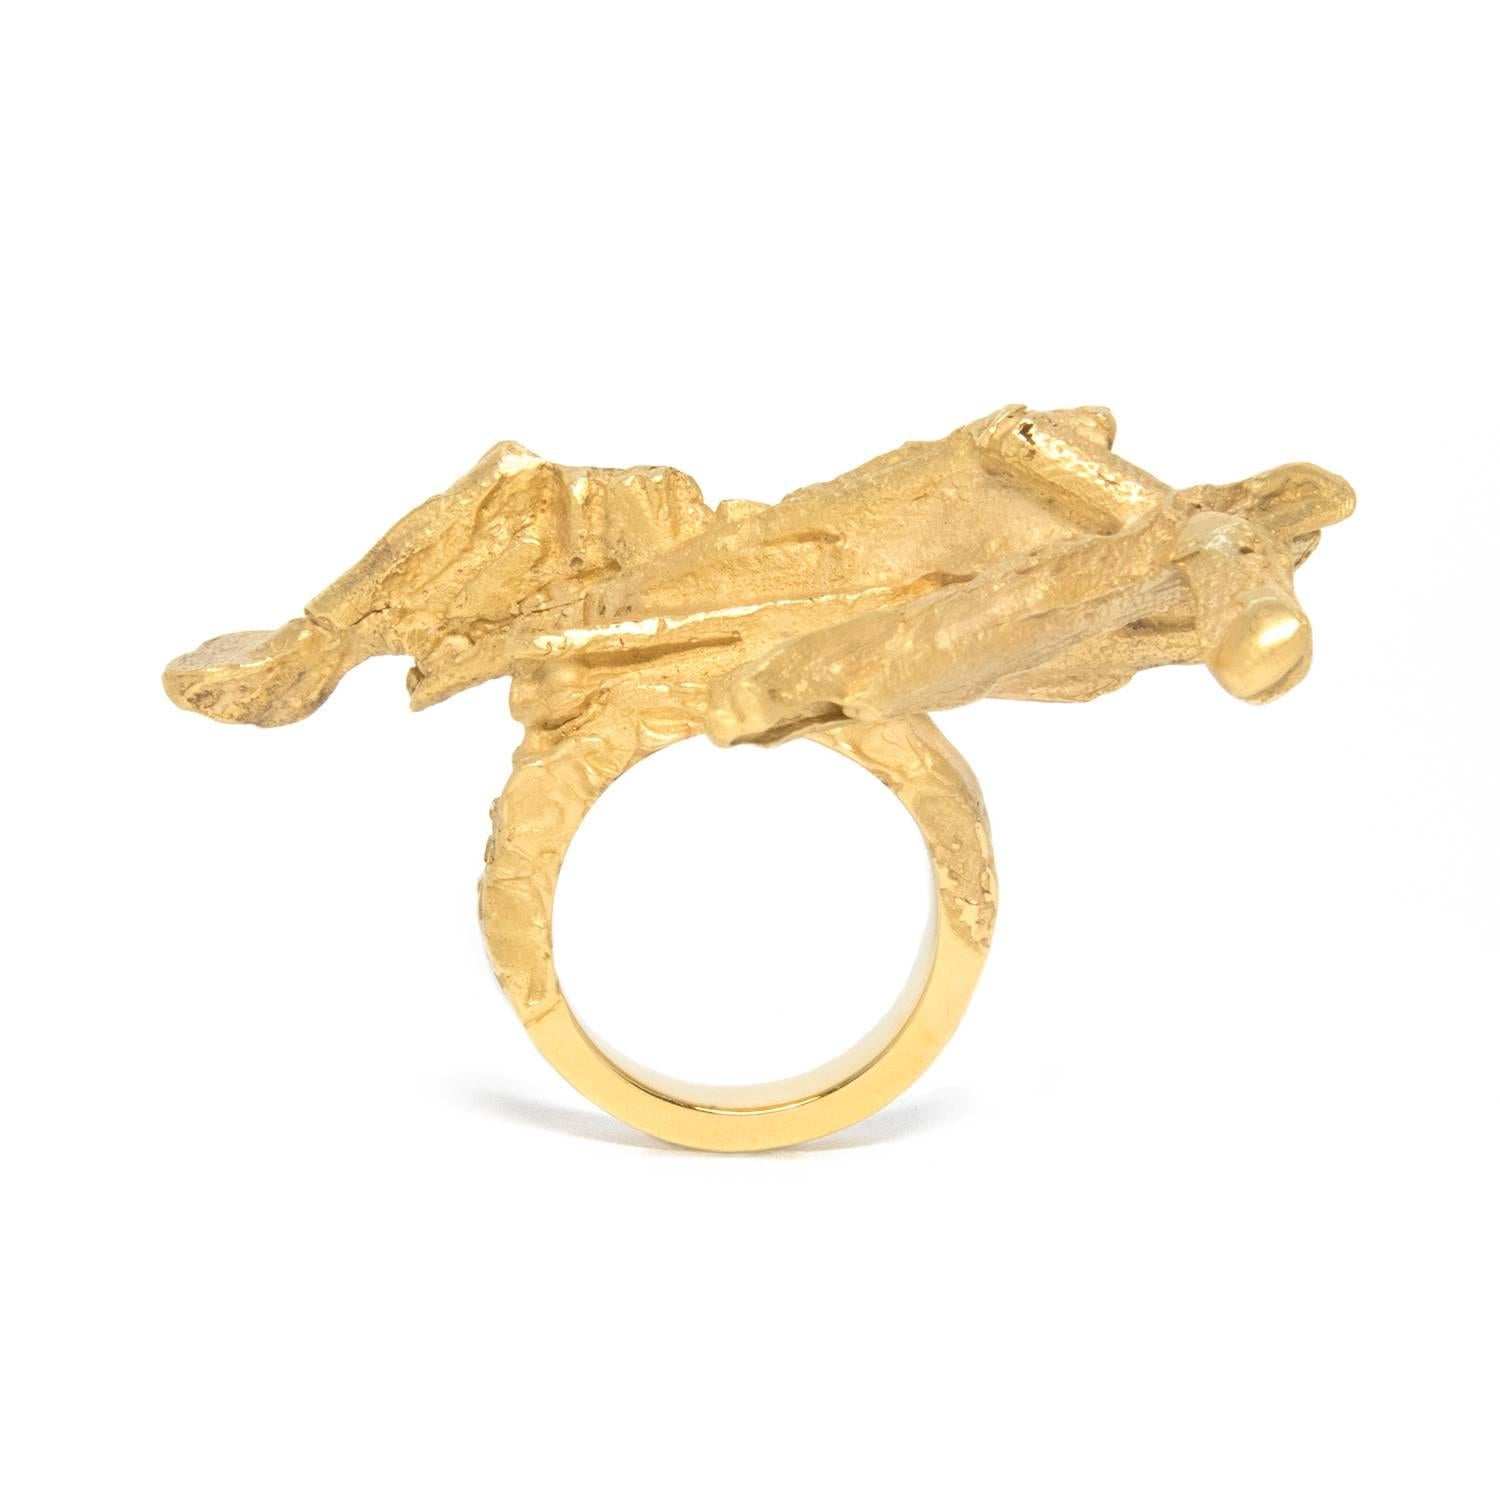 Pengyan: From a Chinese term meaning ‘when a wild goose spreads it's wings’.

I have given this ring the name of Pengyan, due to its shape: can you see the moment a goose breaks from the ground and surges towards the sky? This ring encapsulates the